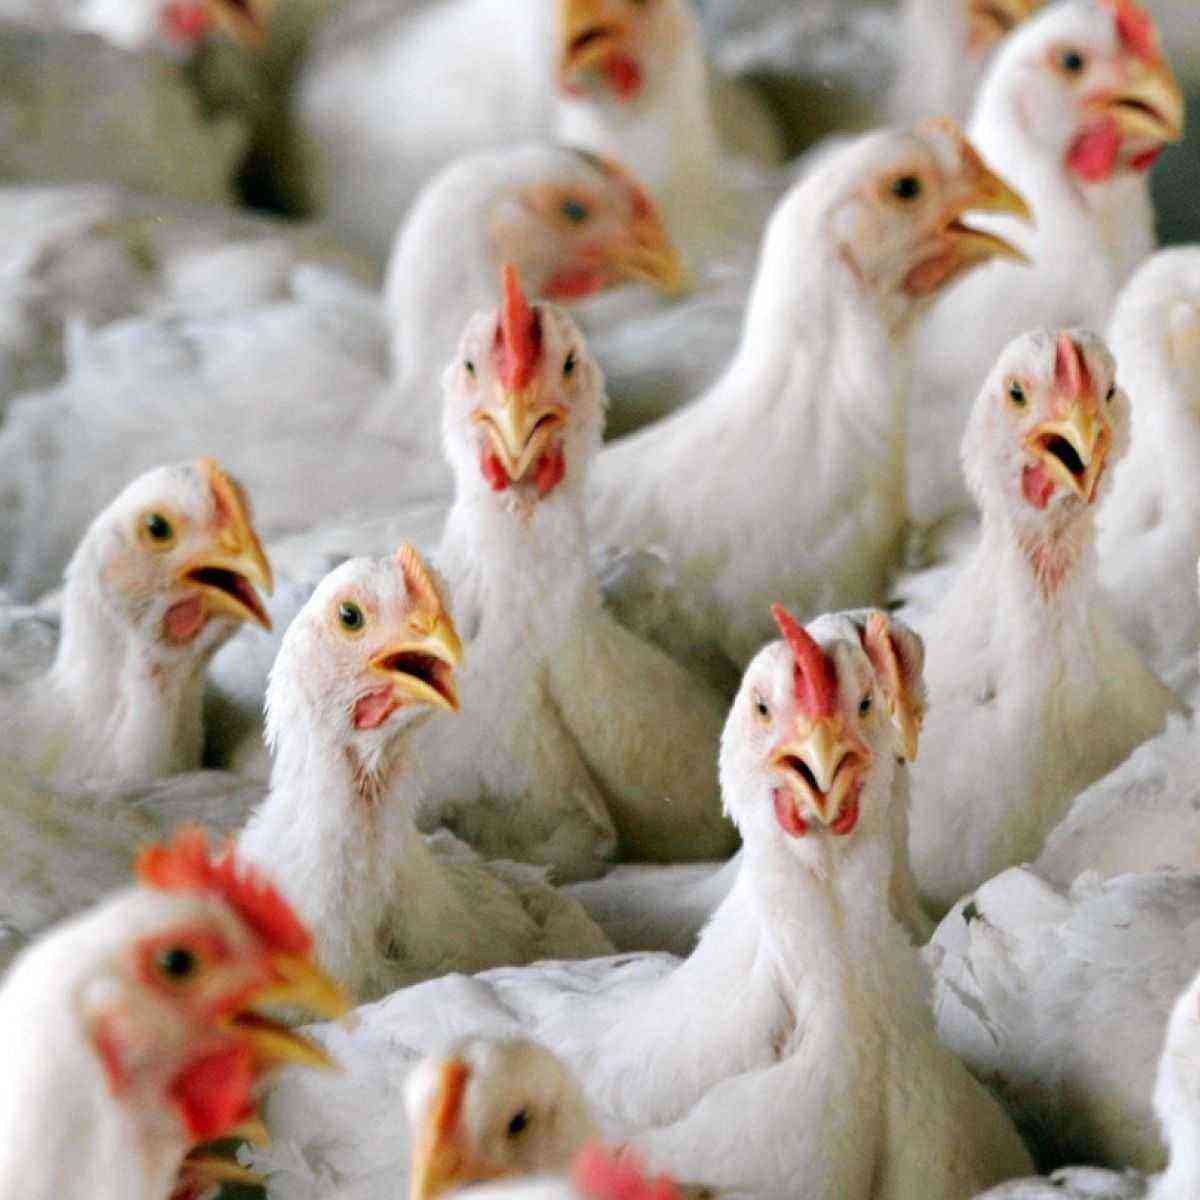 Poulets : grippe aviaire